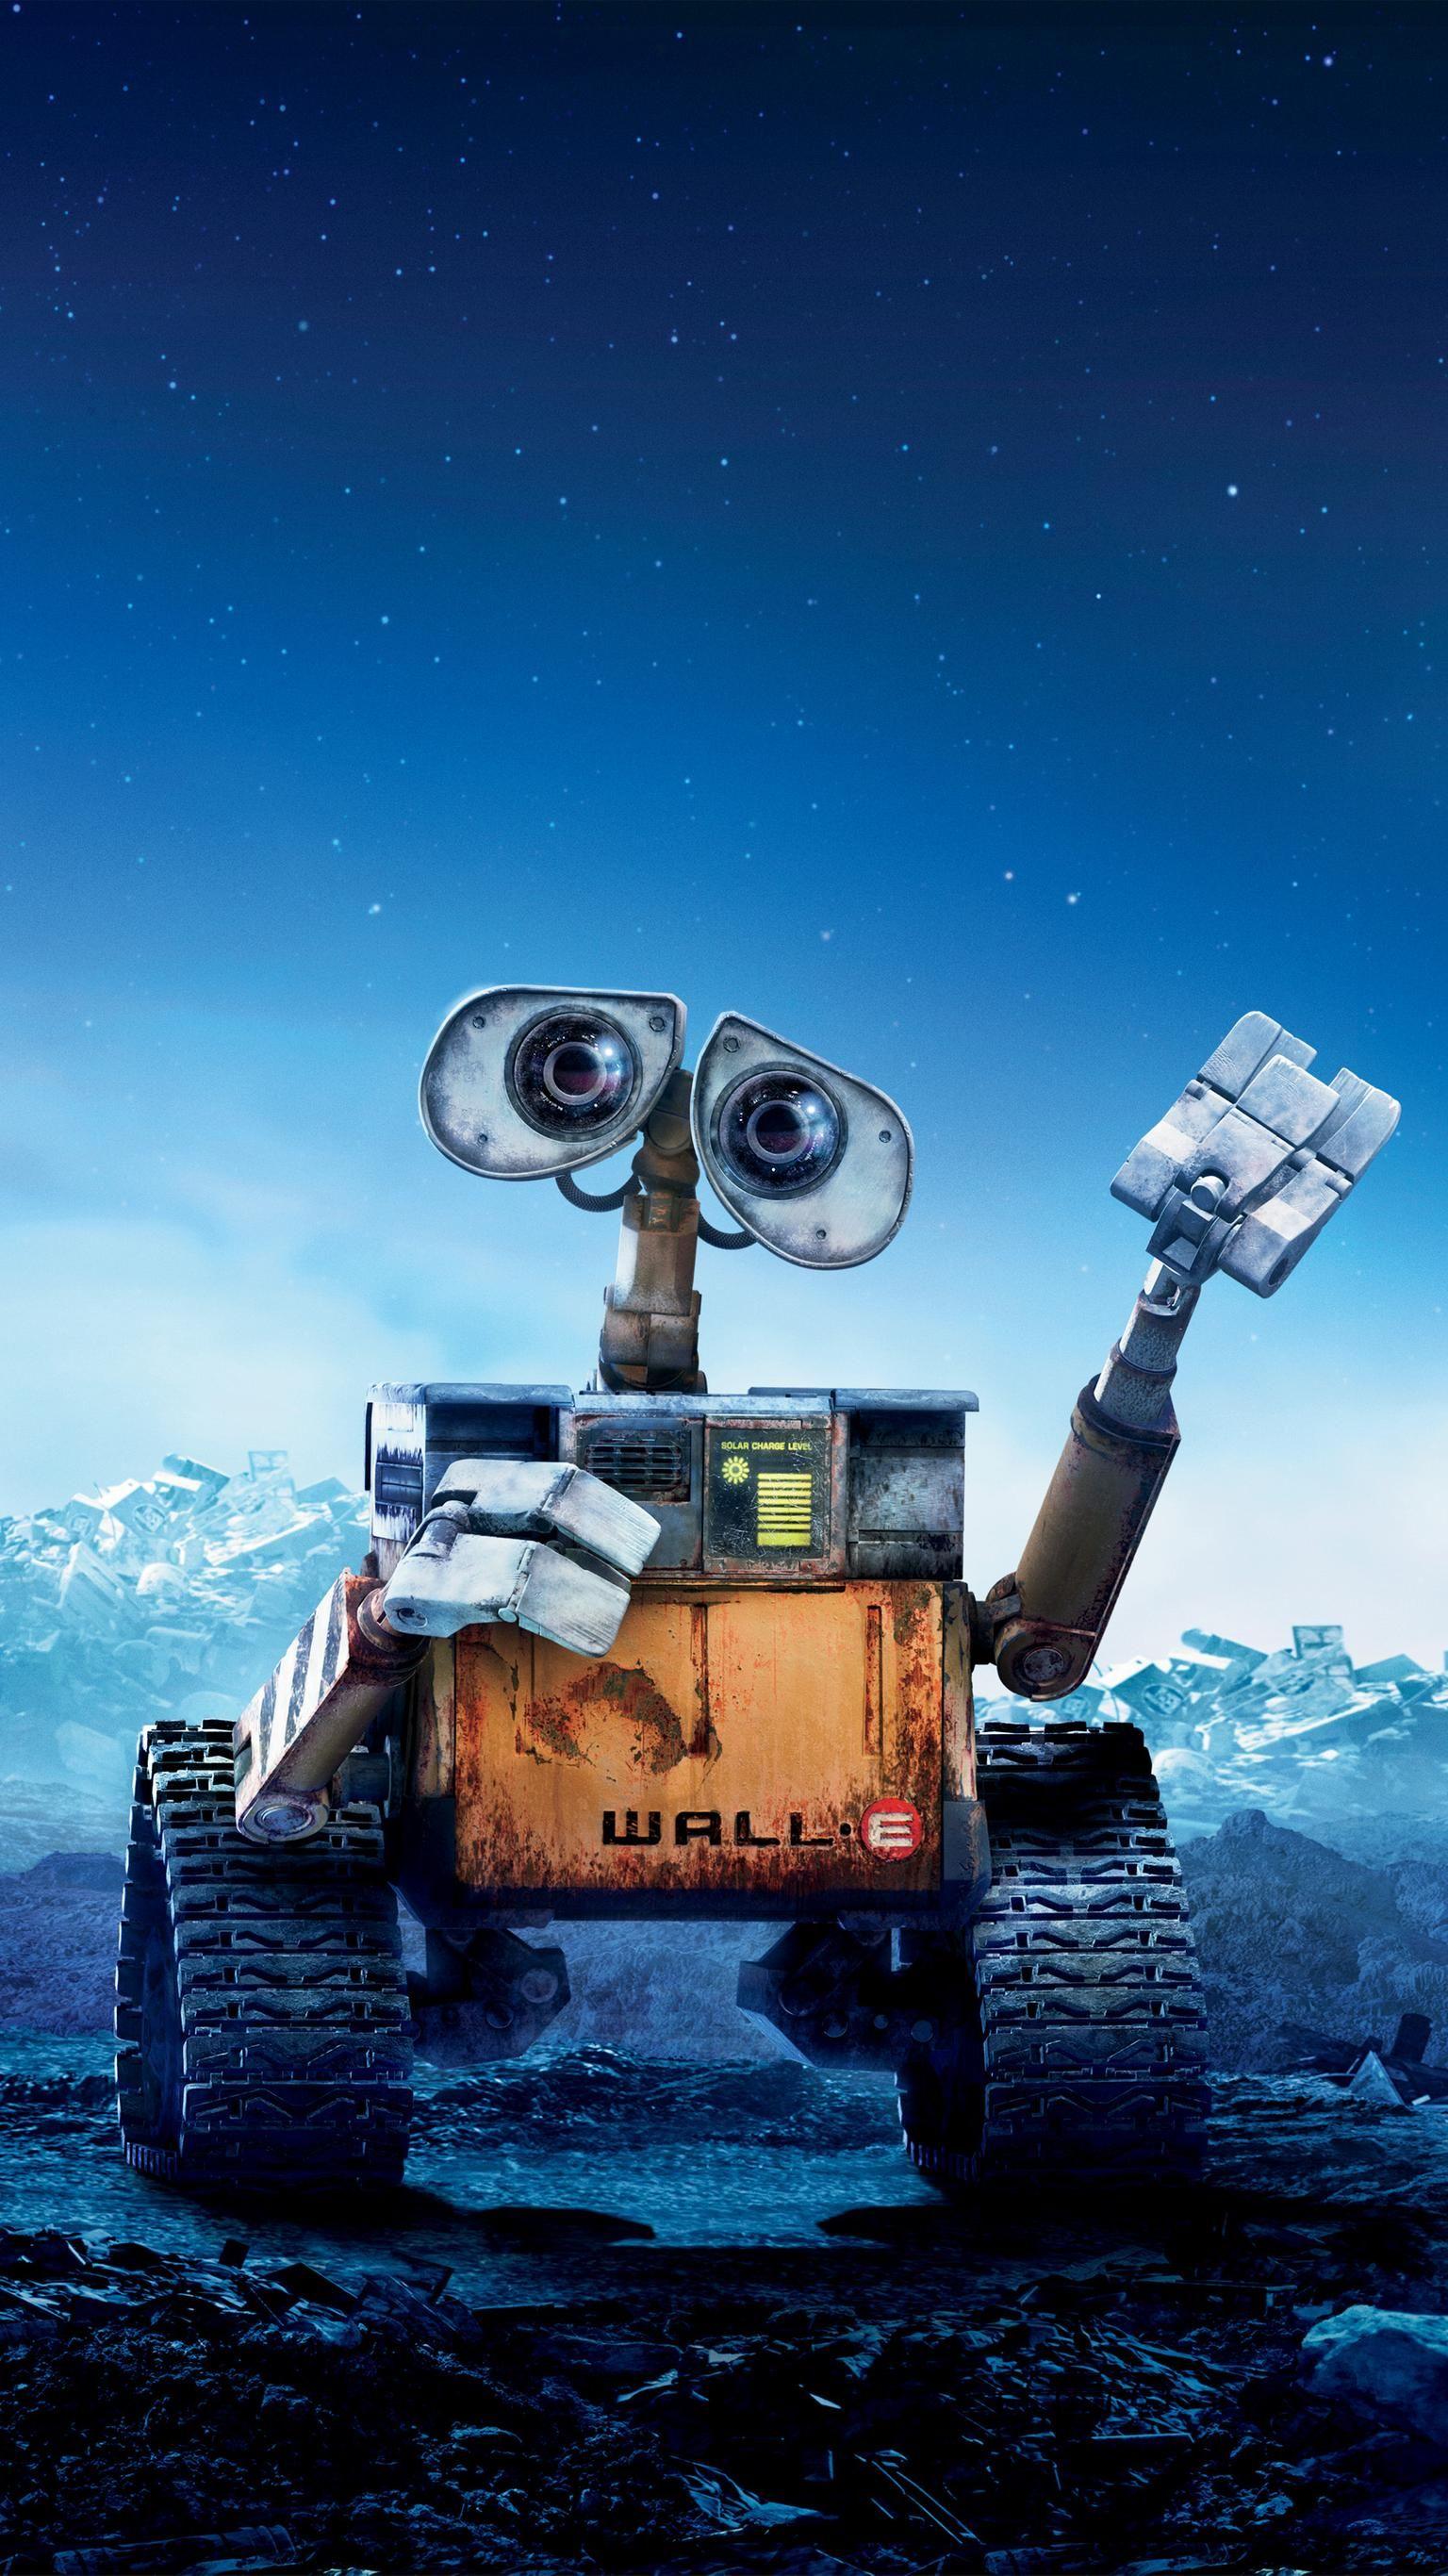 download game wall e untuk android